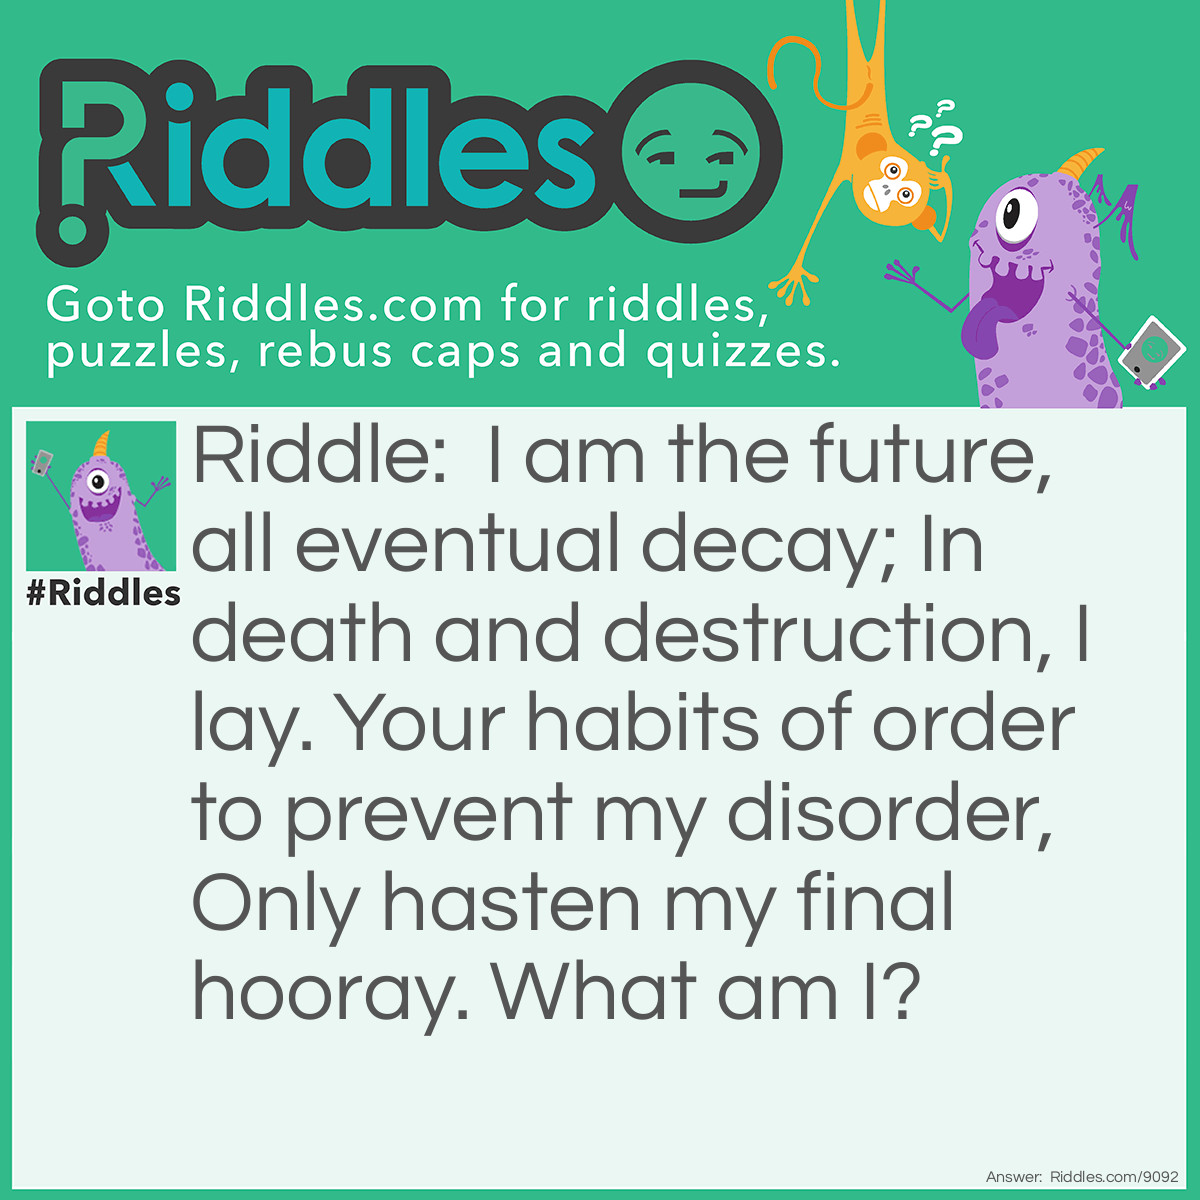 Riddle: I am the future, all eventual decay; In death and destruction, I lay. Your habits of order to prevent my disorder, Only hasten my final hooray. What am I? Answer: Entropy.